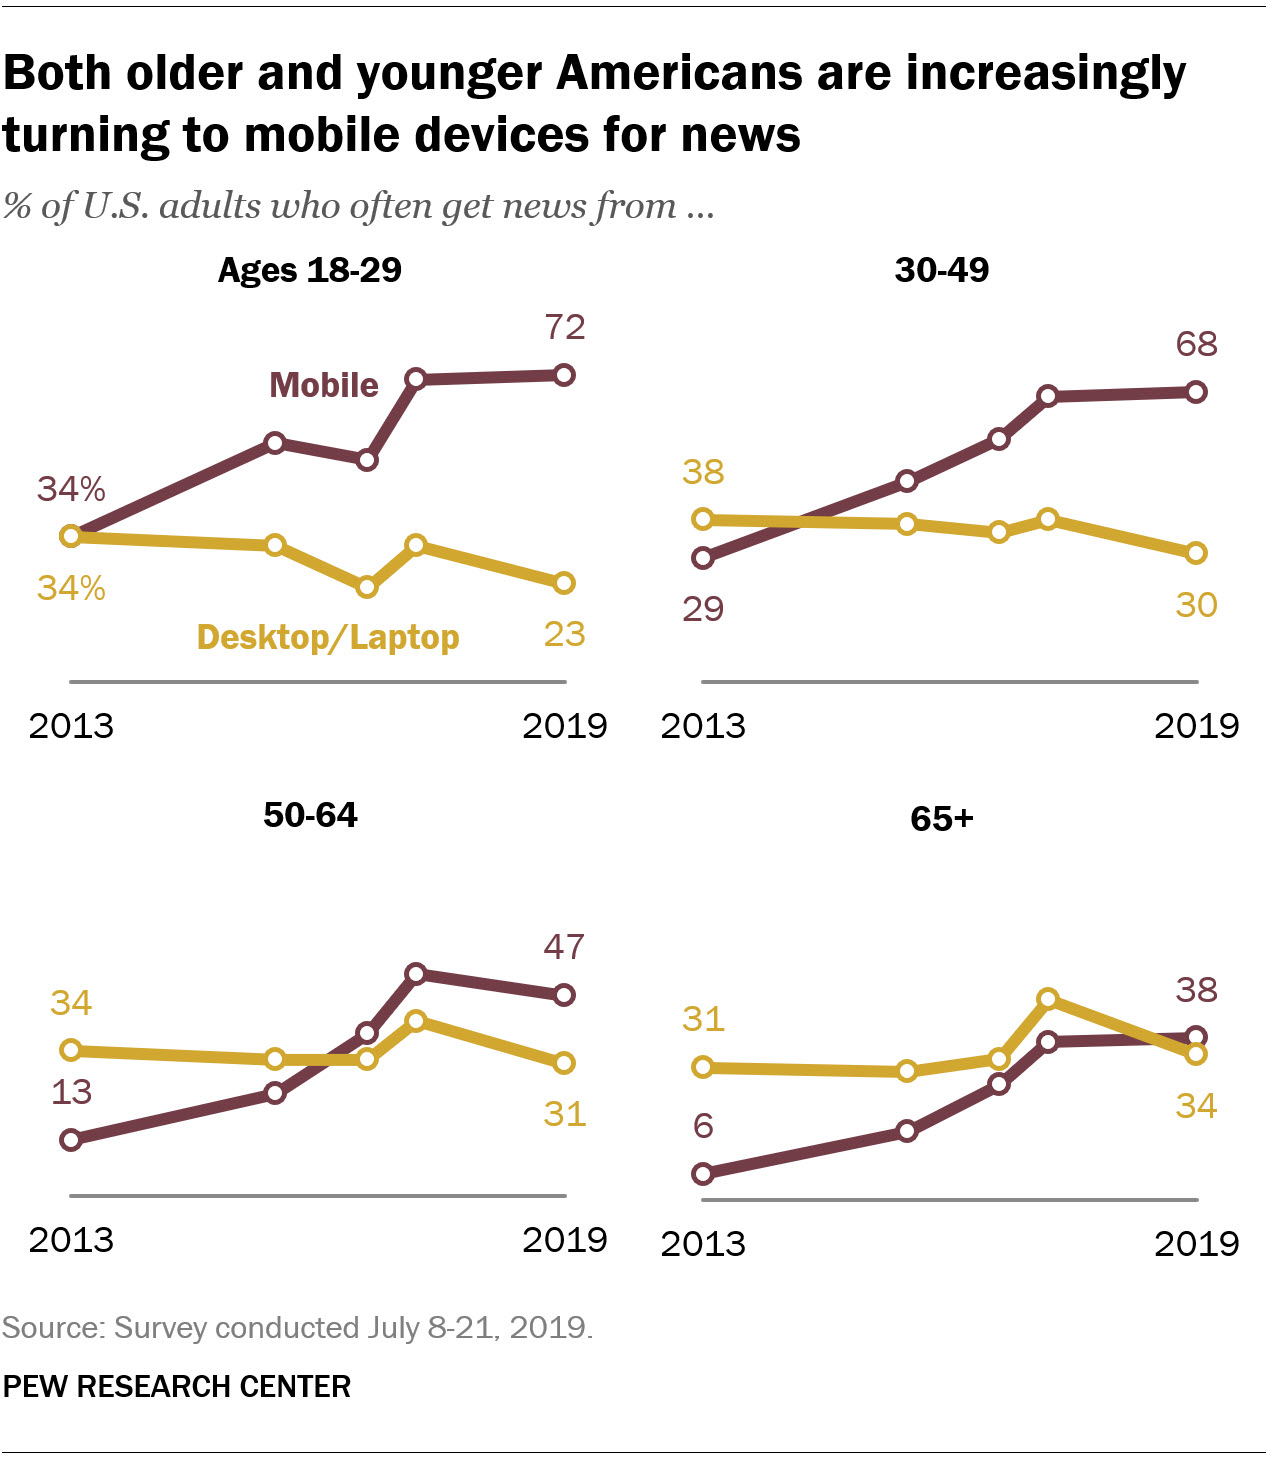 Both older and younger Americans are increasingly turning to mobile devices for news